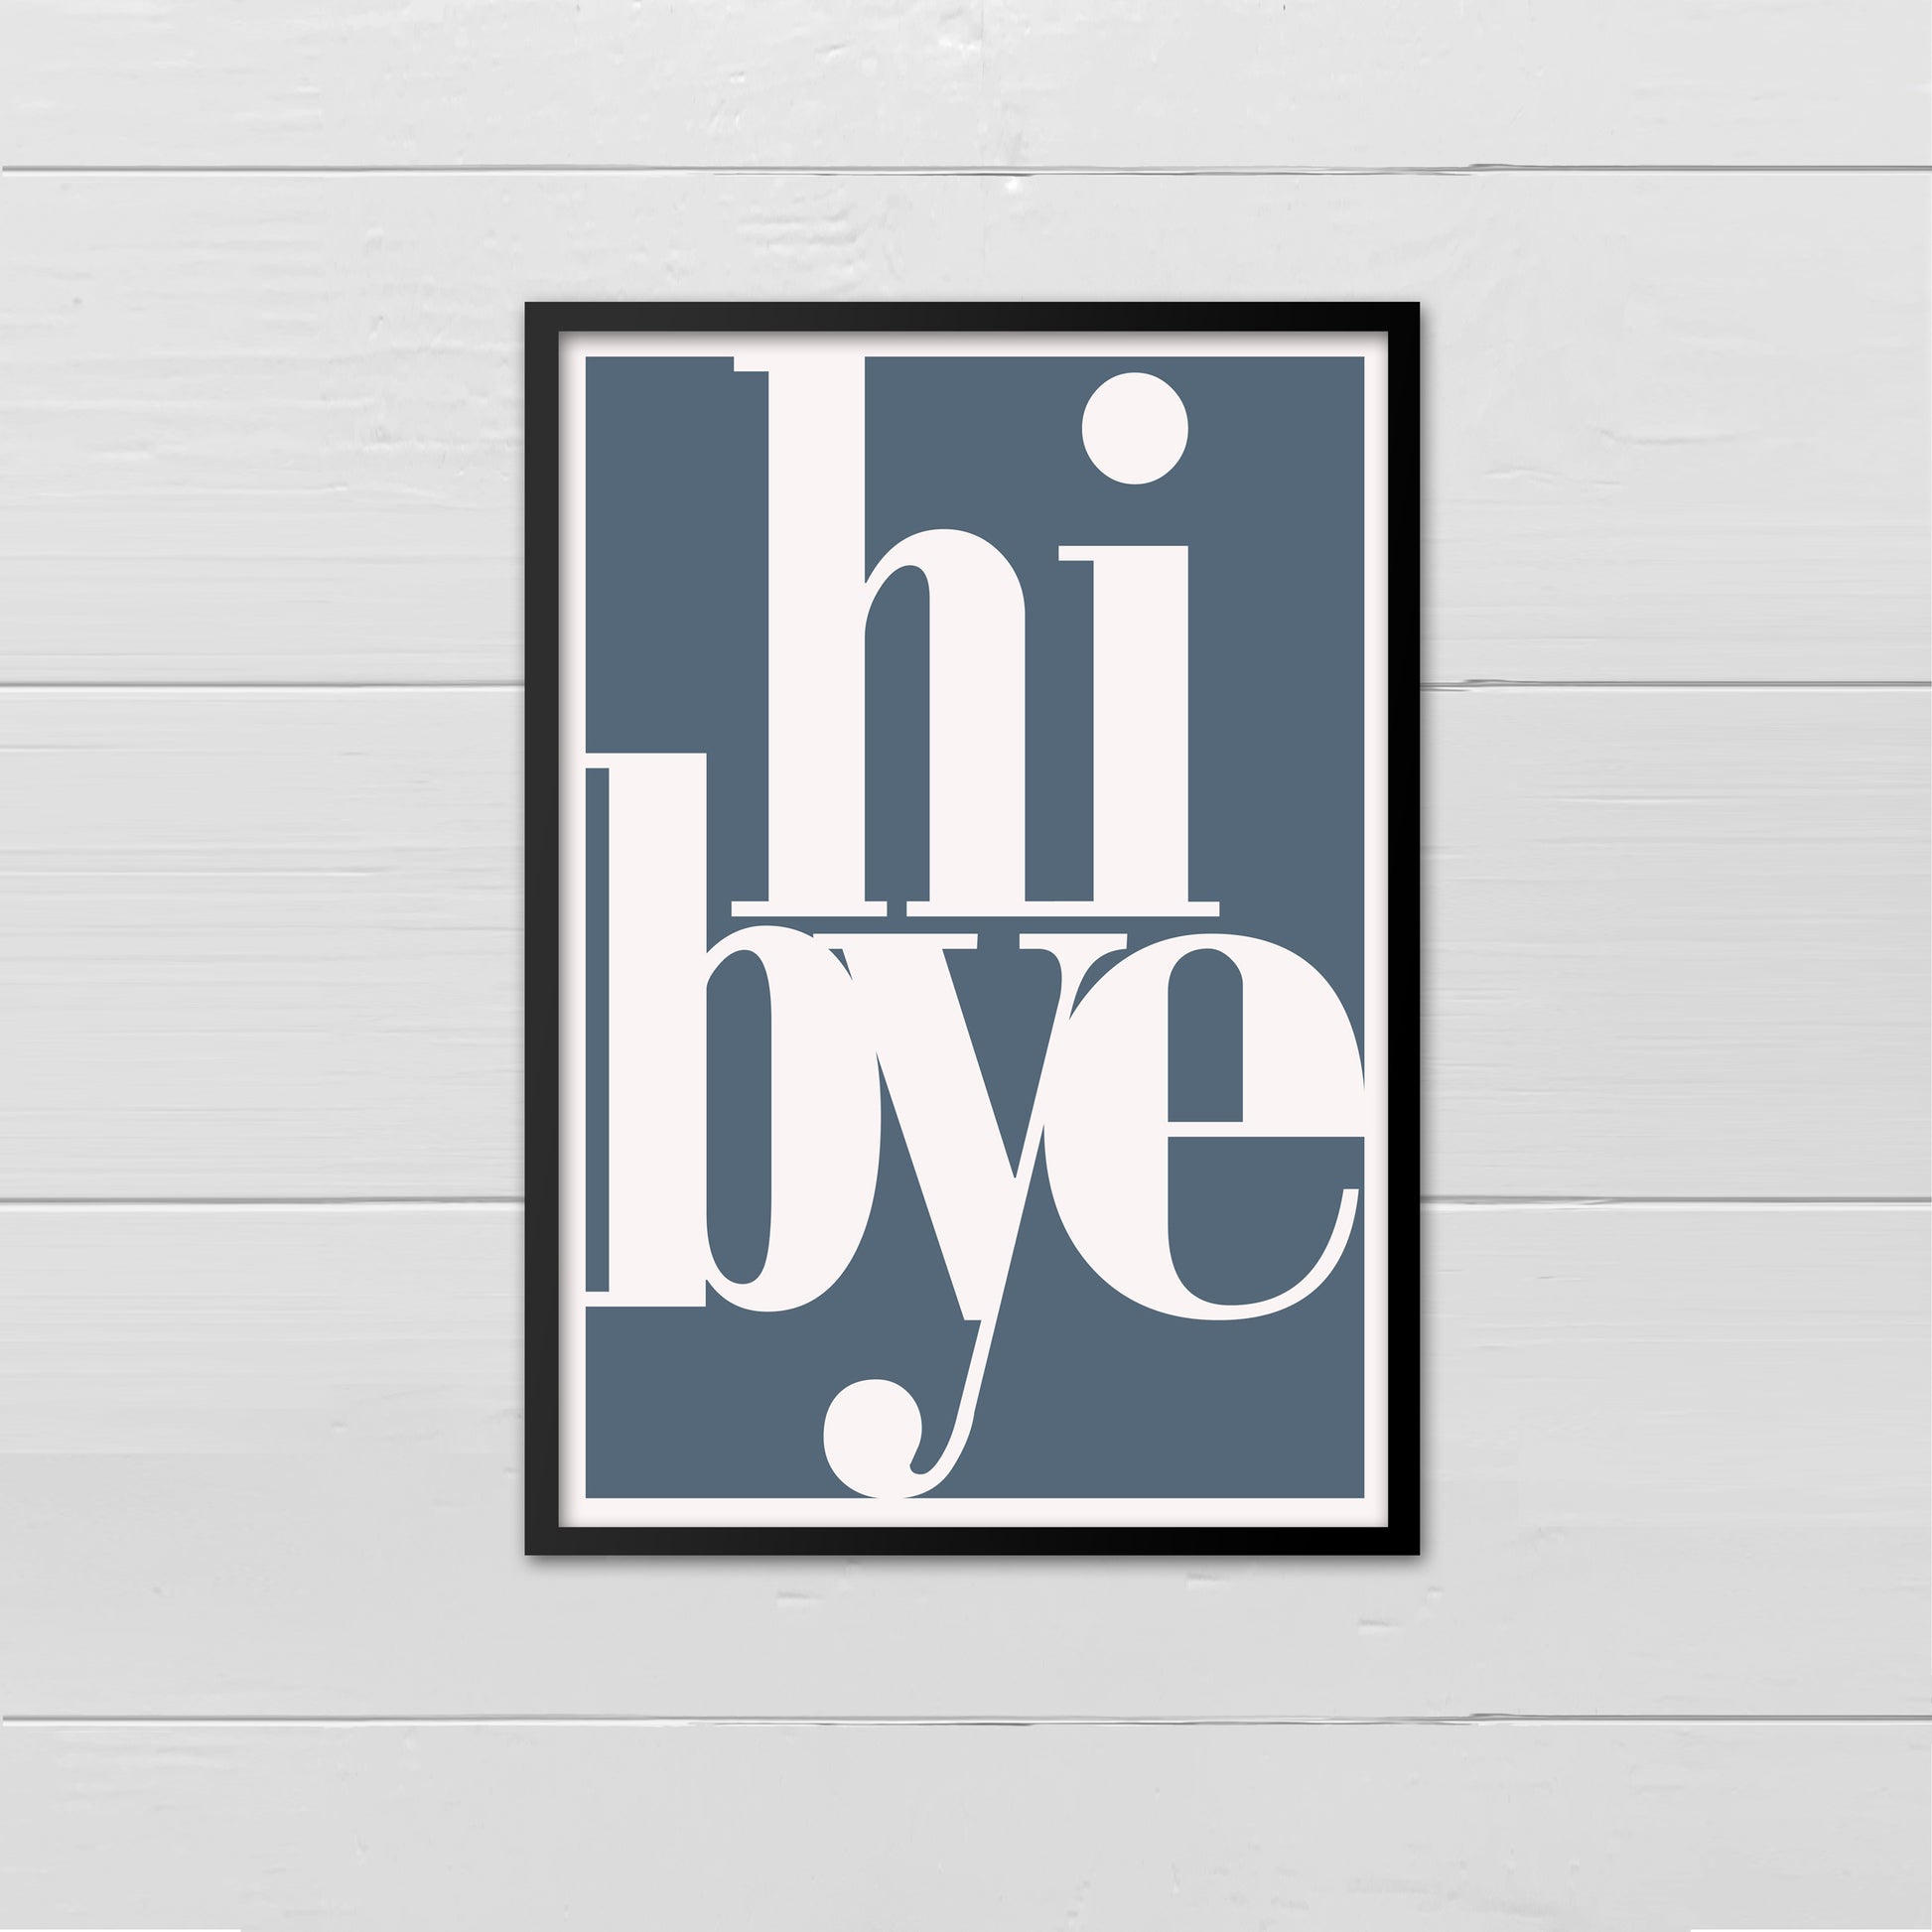 Portrait style print, with the words hi bye written in a lowercase serif font, printed in cream onto a blue background, with a cream border.